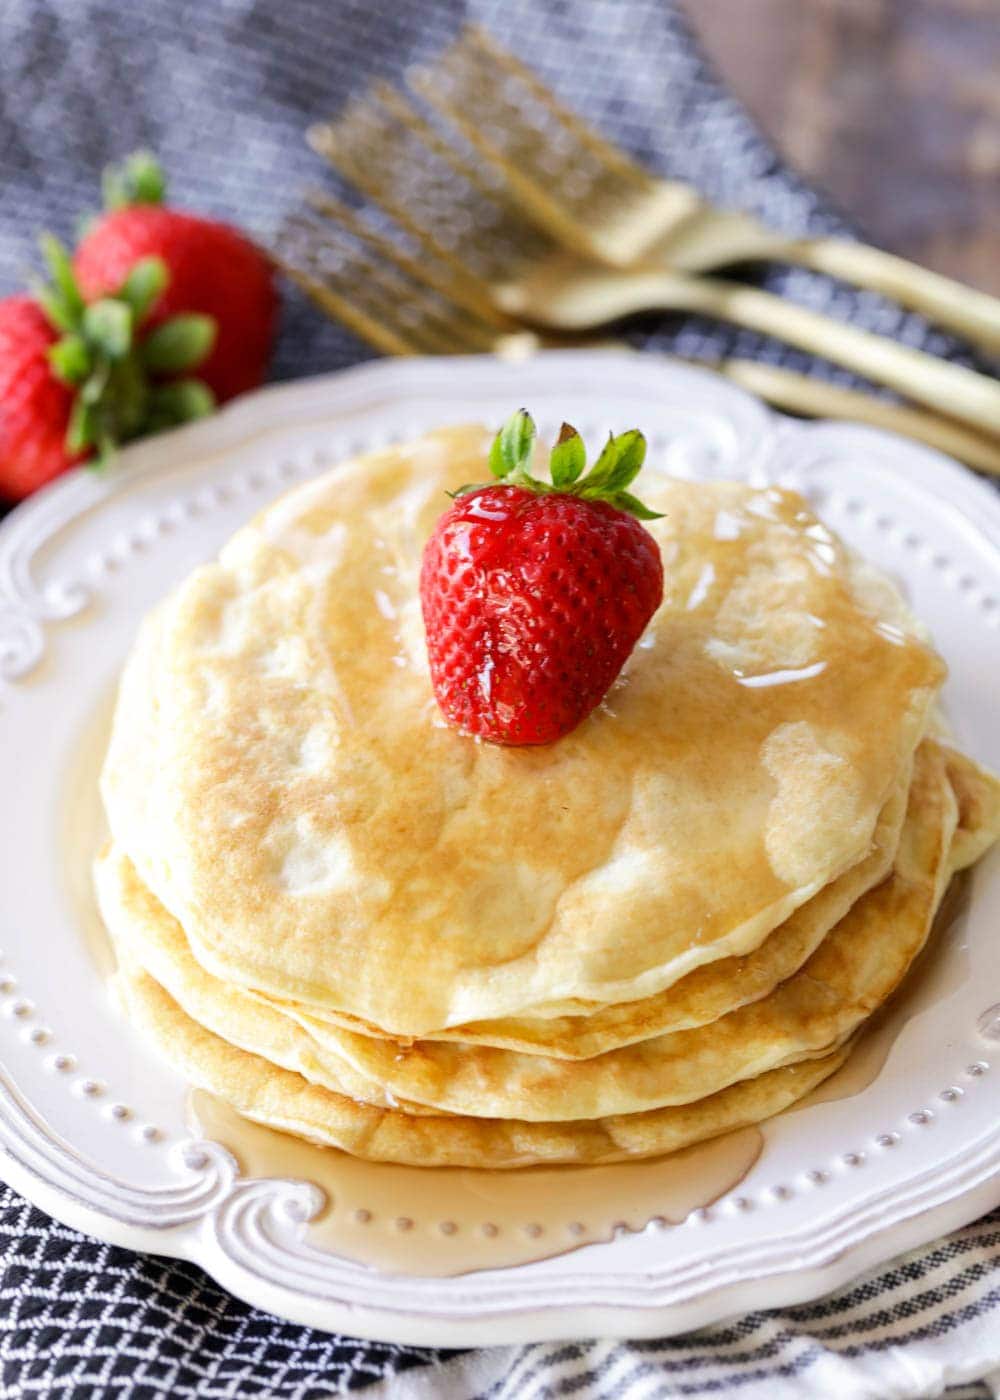 A stack of protein powder pancakes with a strawberry and syrup.